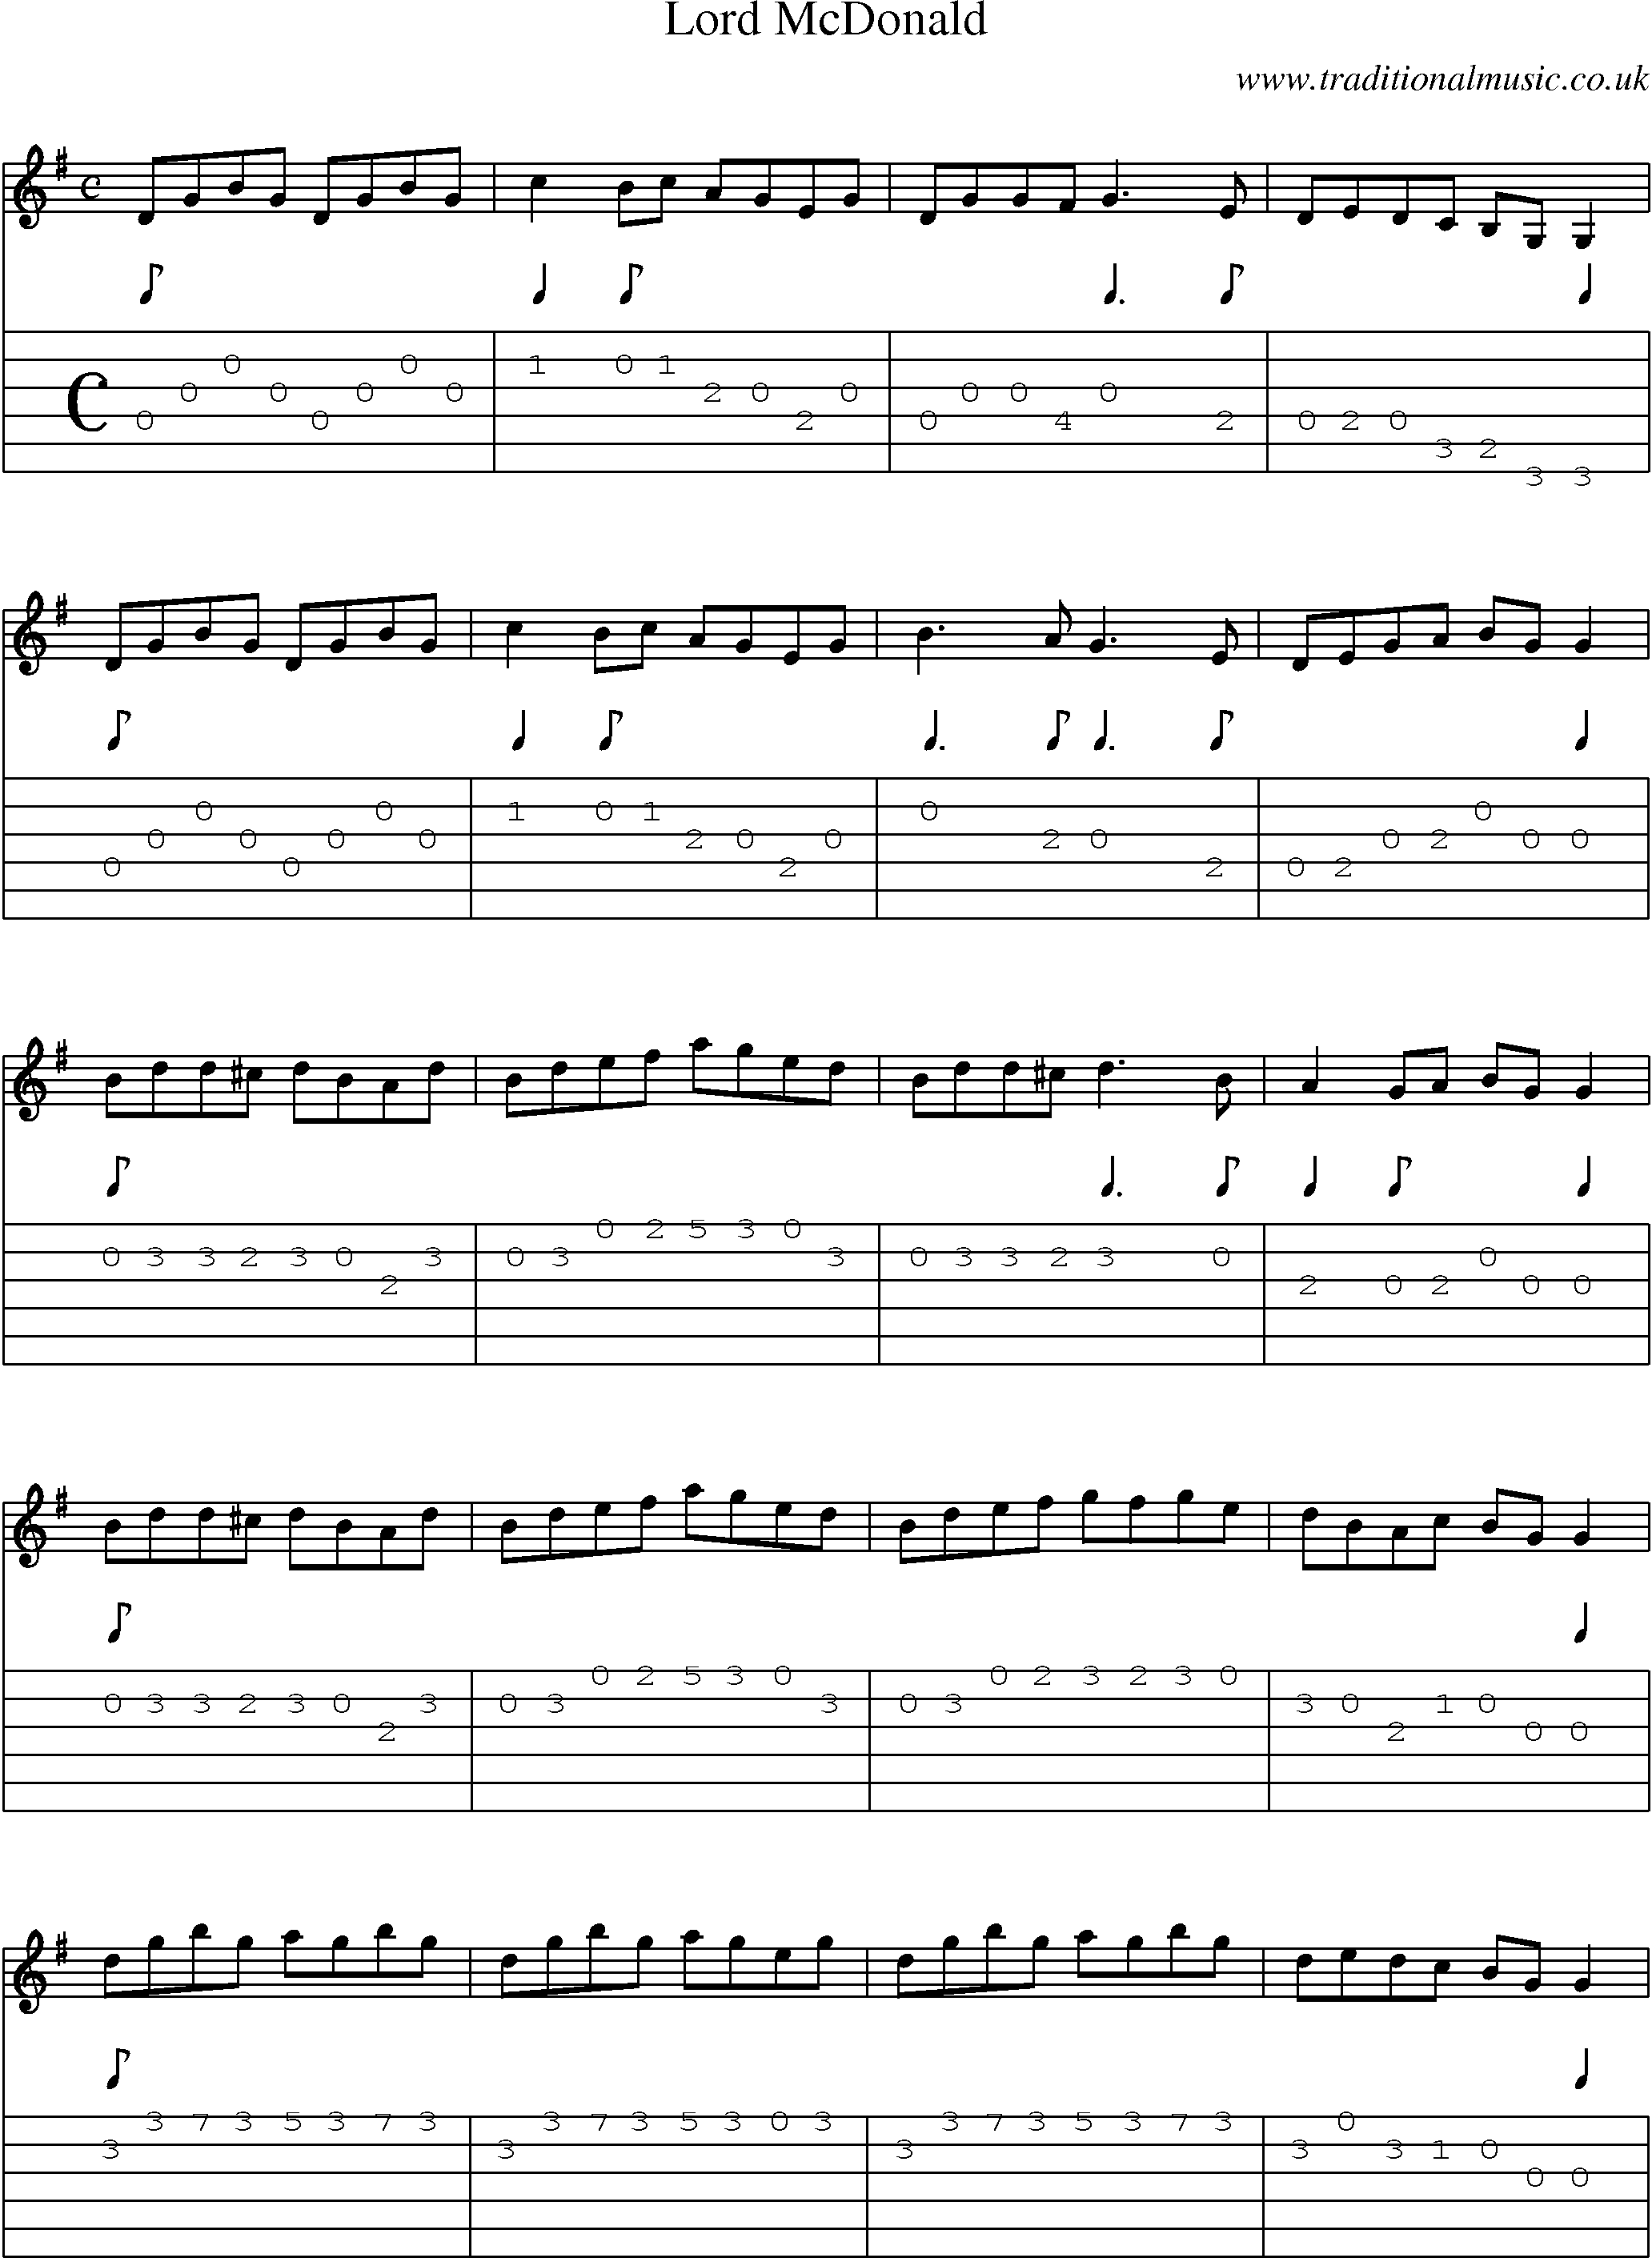 Music Score and Guitar Tabs for Lord Mcdonald